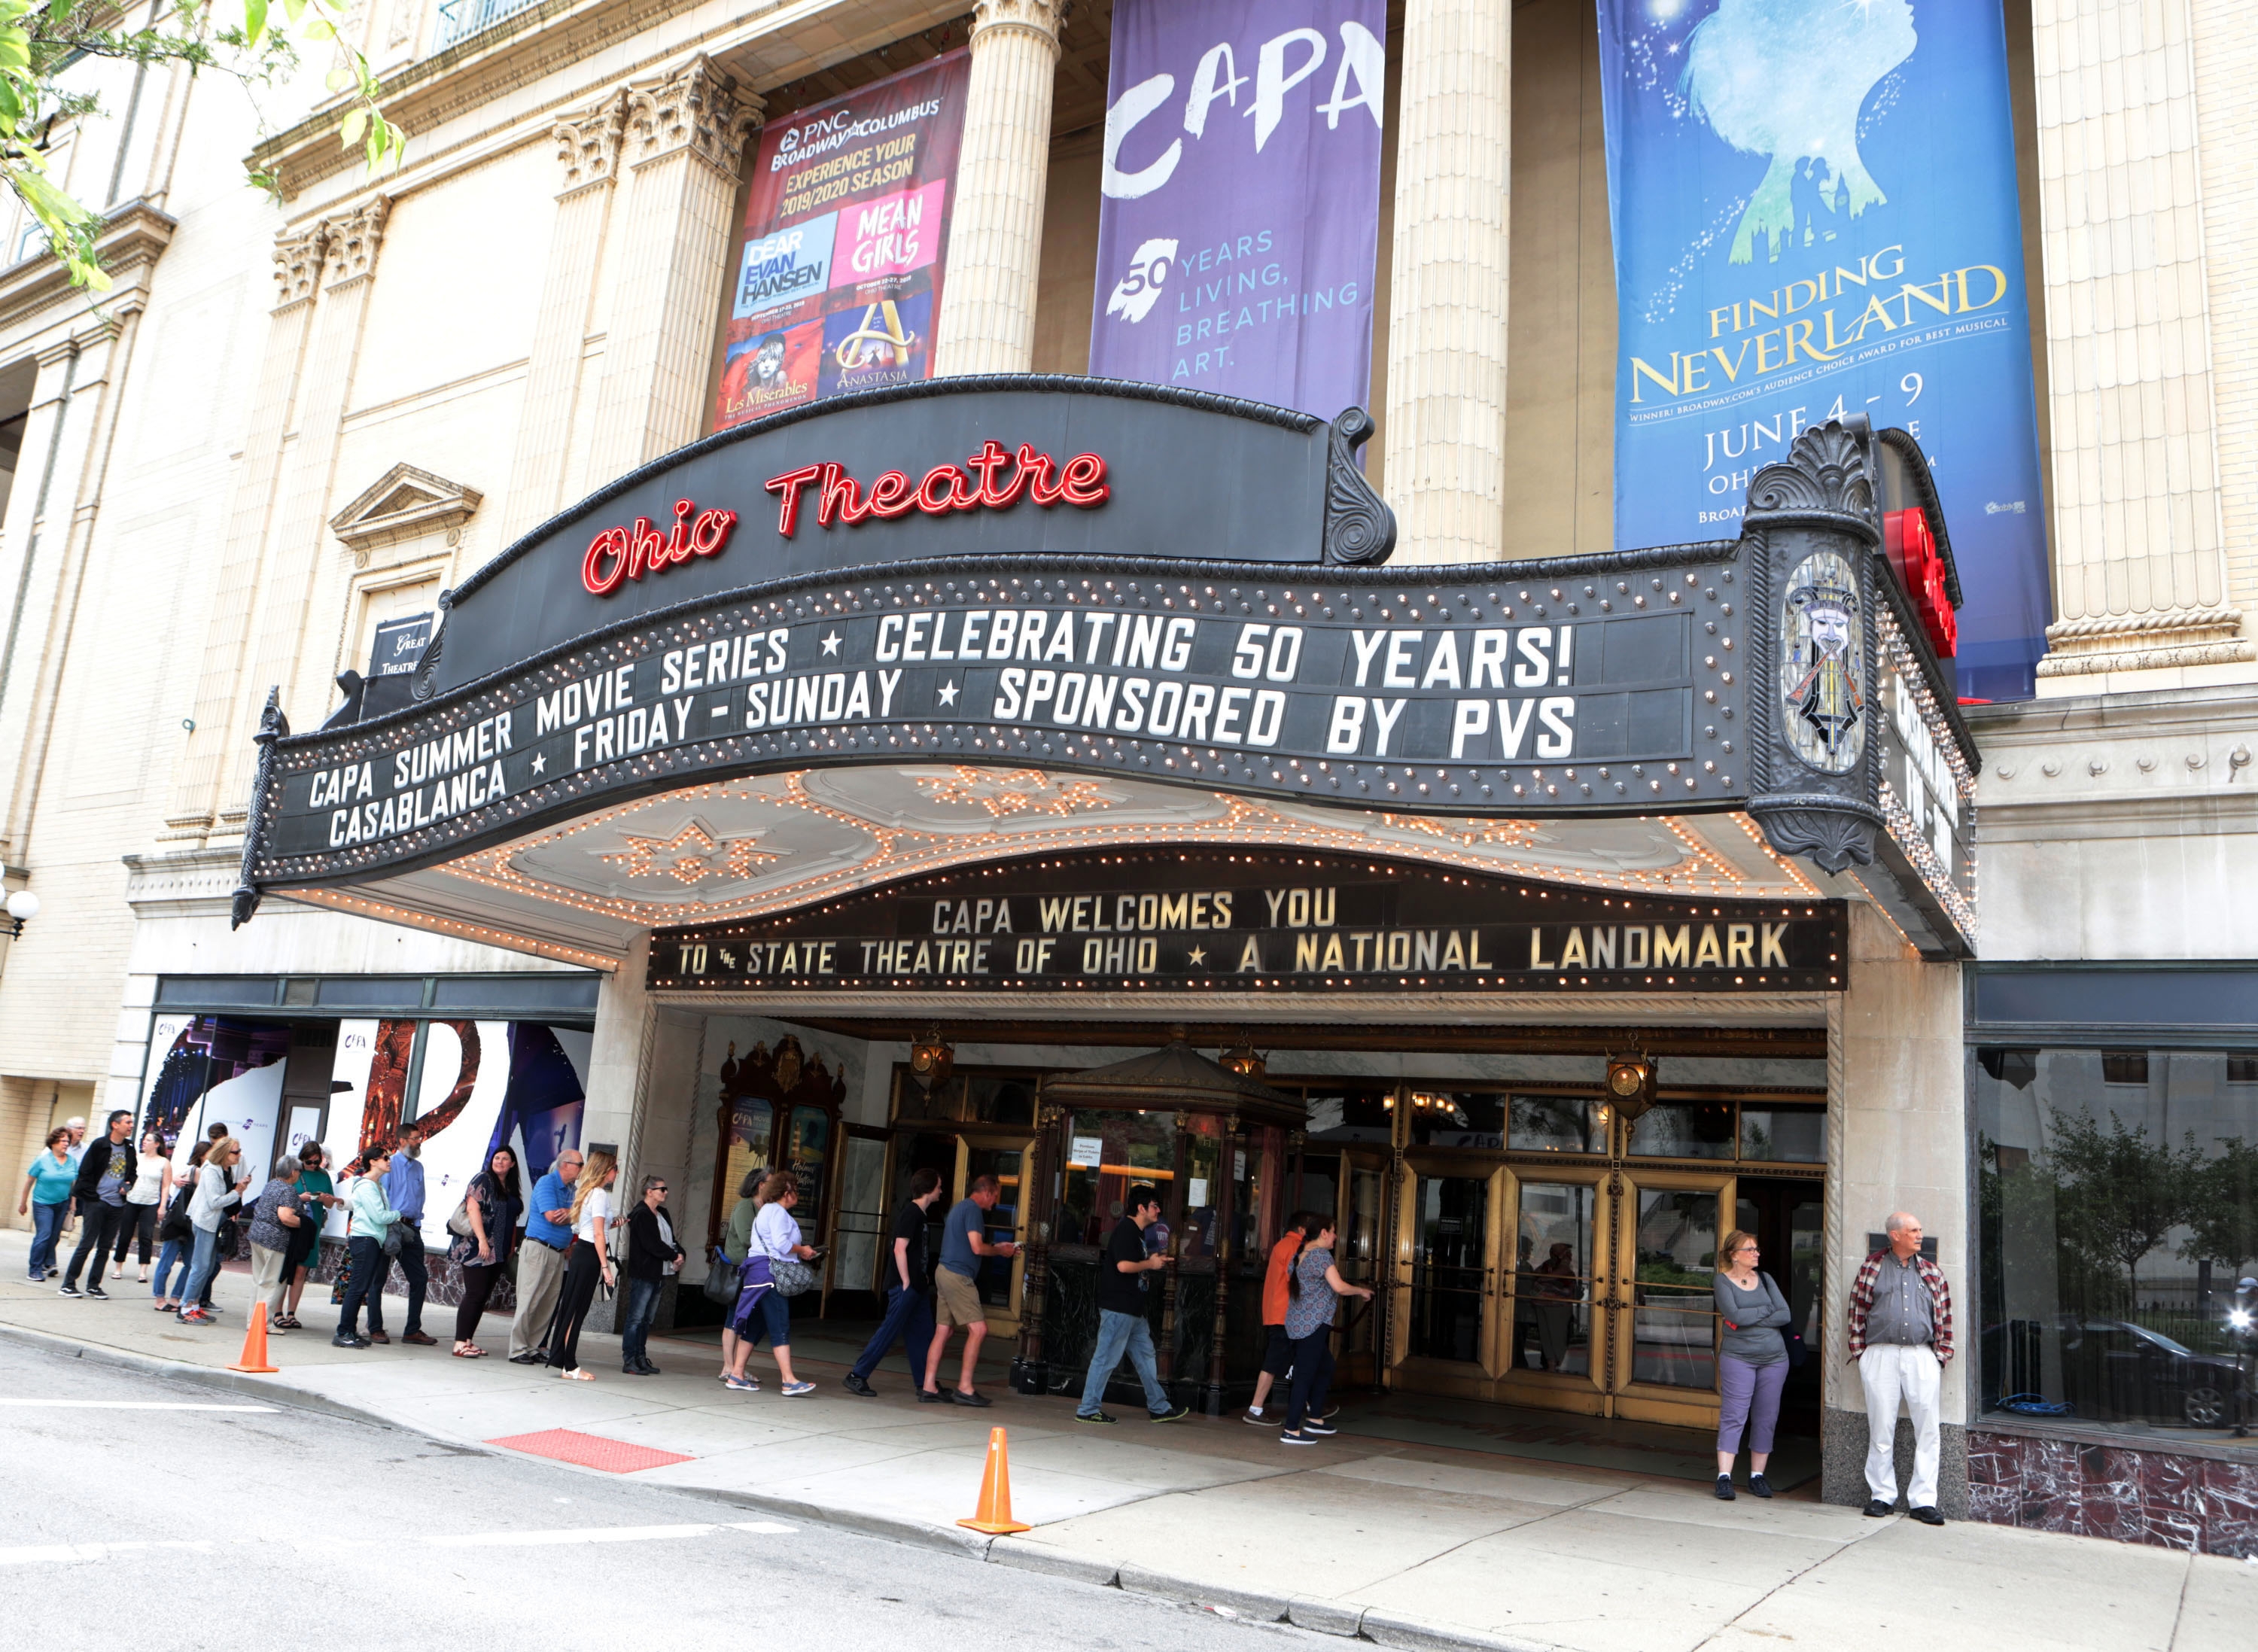 FREE open house walking tour of the Ohio, Southern, and Palace Theatre happening in July!